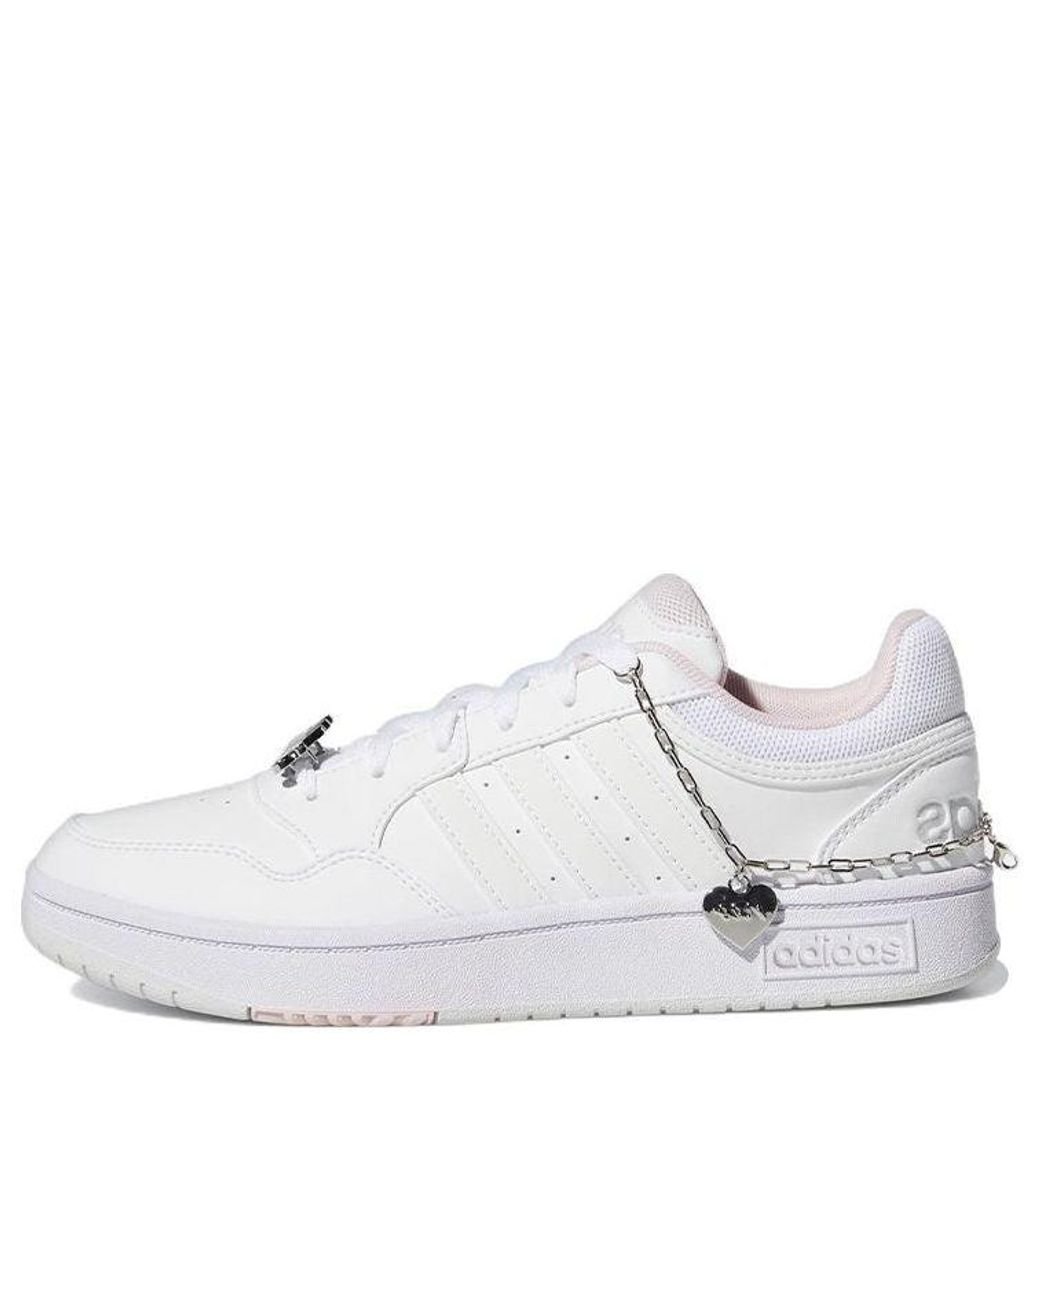 adidas Neo Hoops 3.0 in White | Lyst